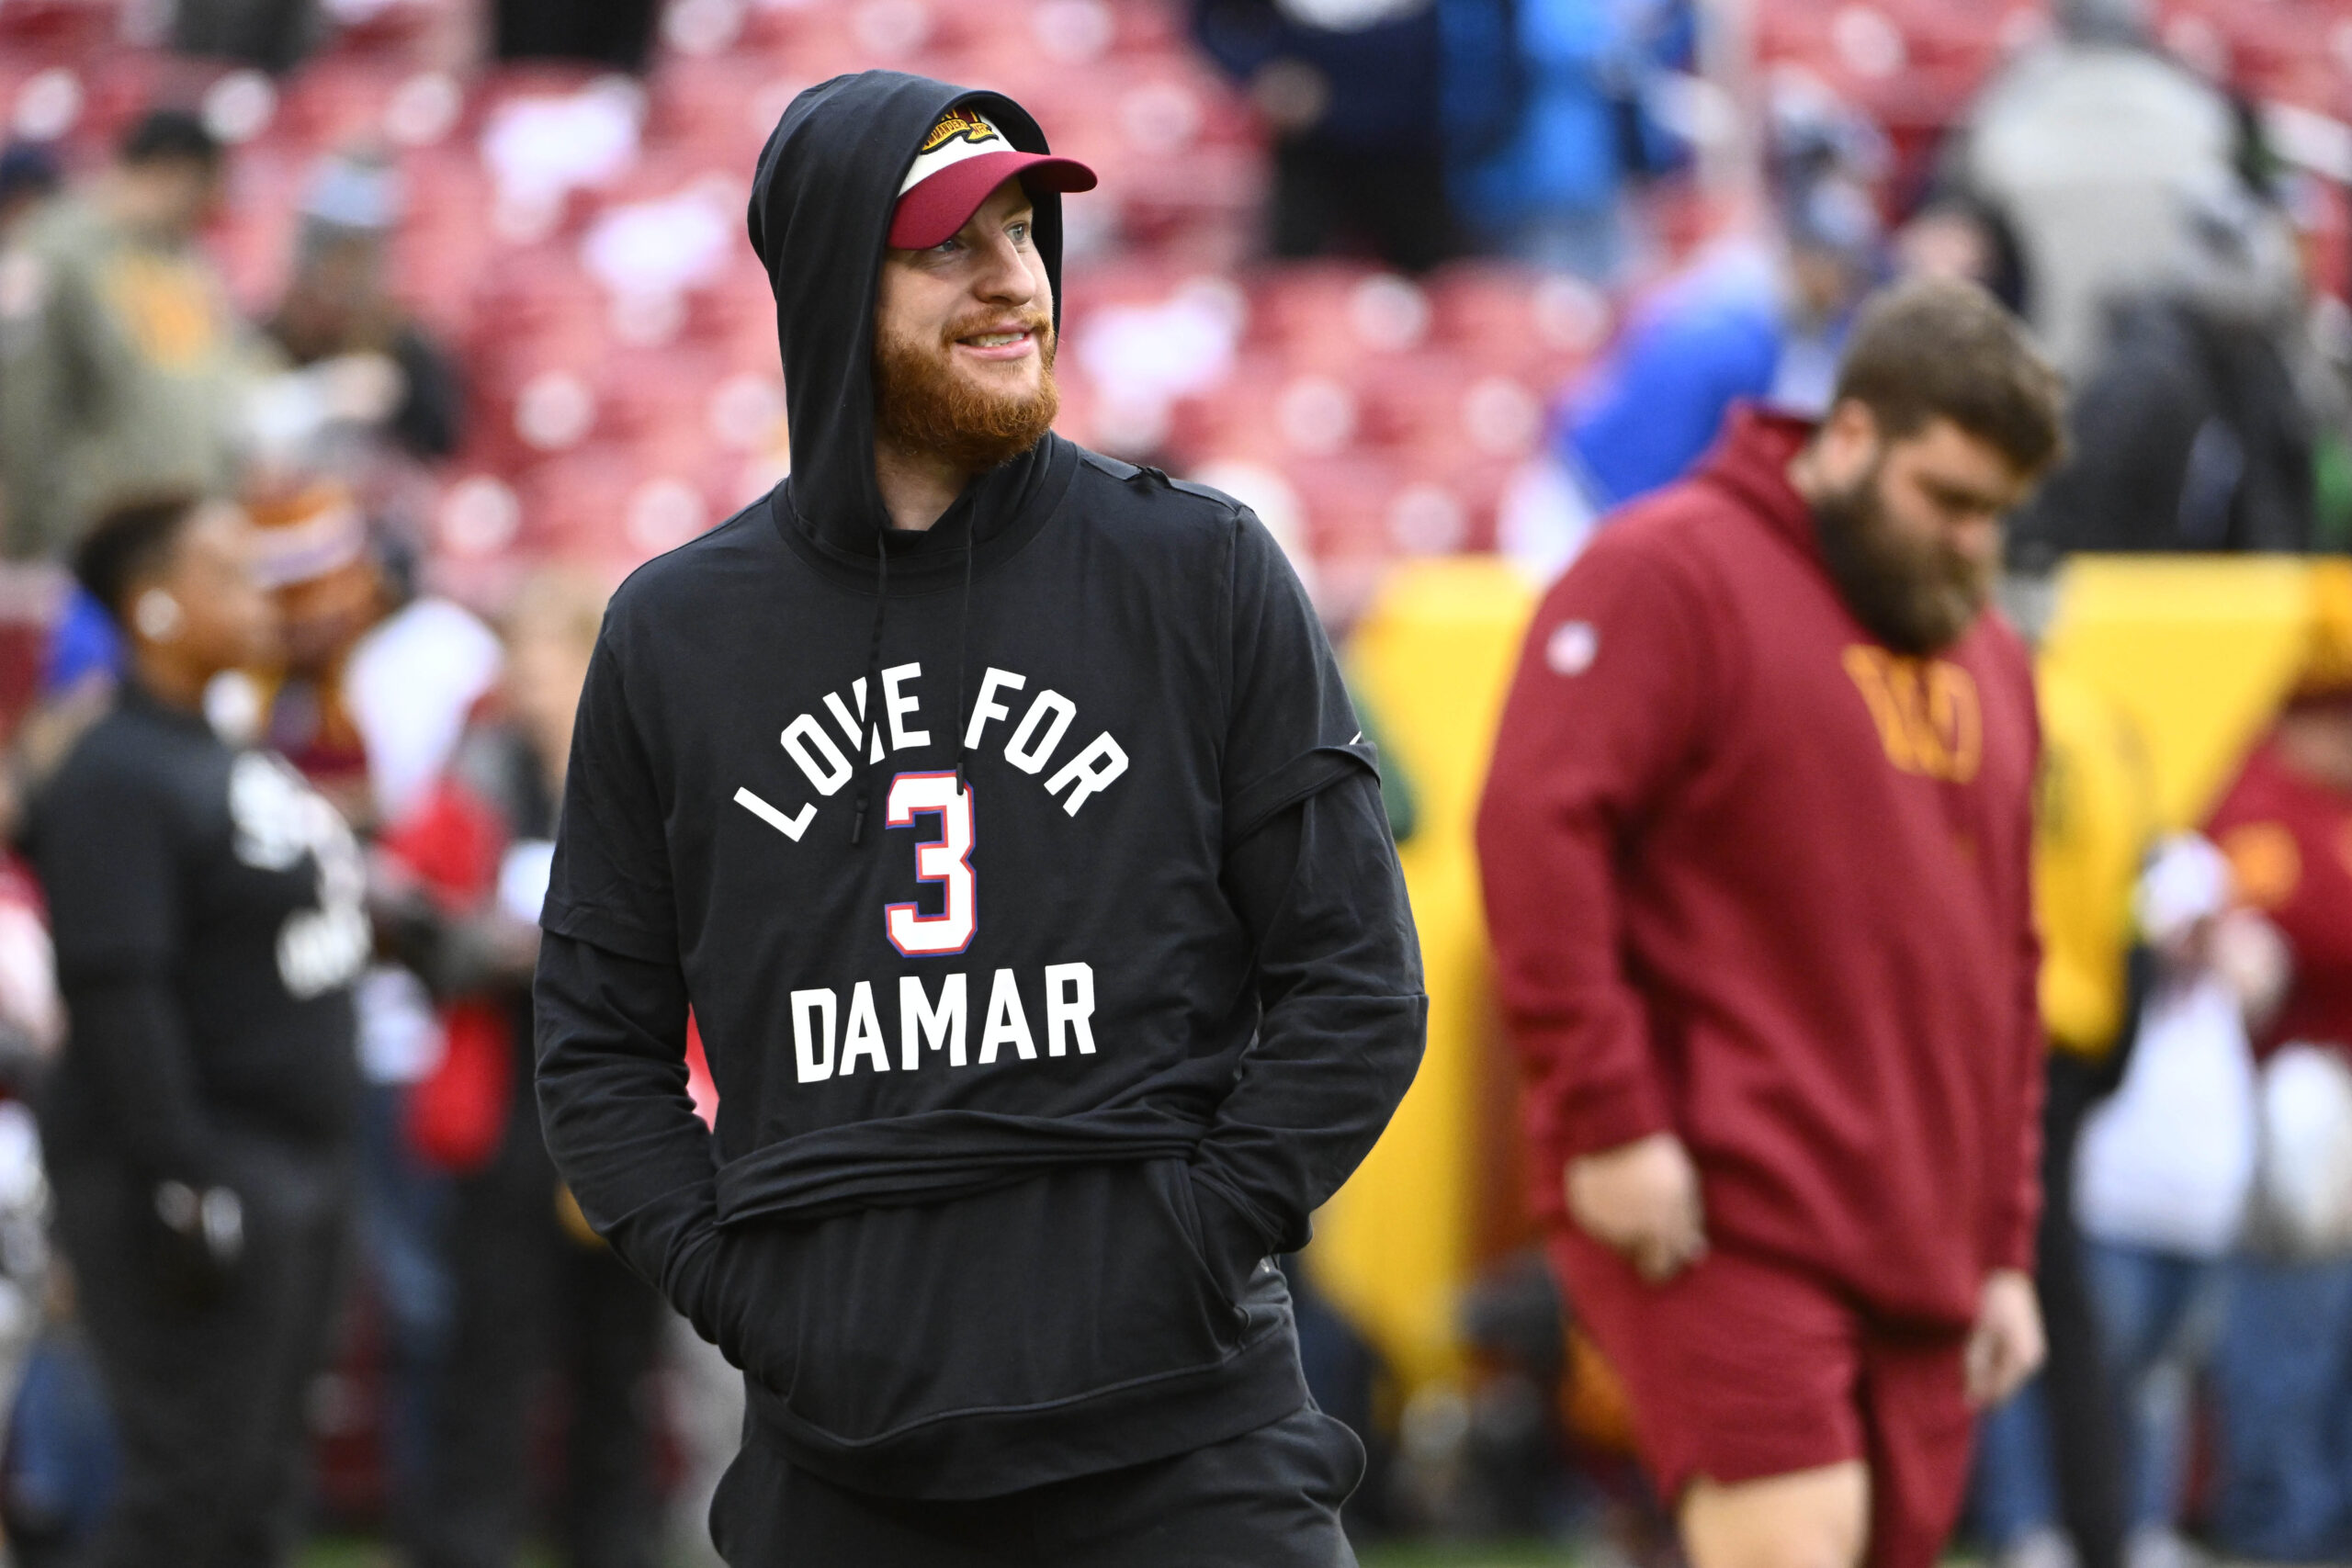 Washington Commanders quarterback Carson Wentz on the field wearing a shirt in support of Demar Hamlin before the game against the Dallas Cowboys at FedExField.